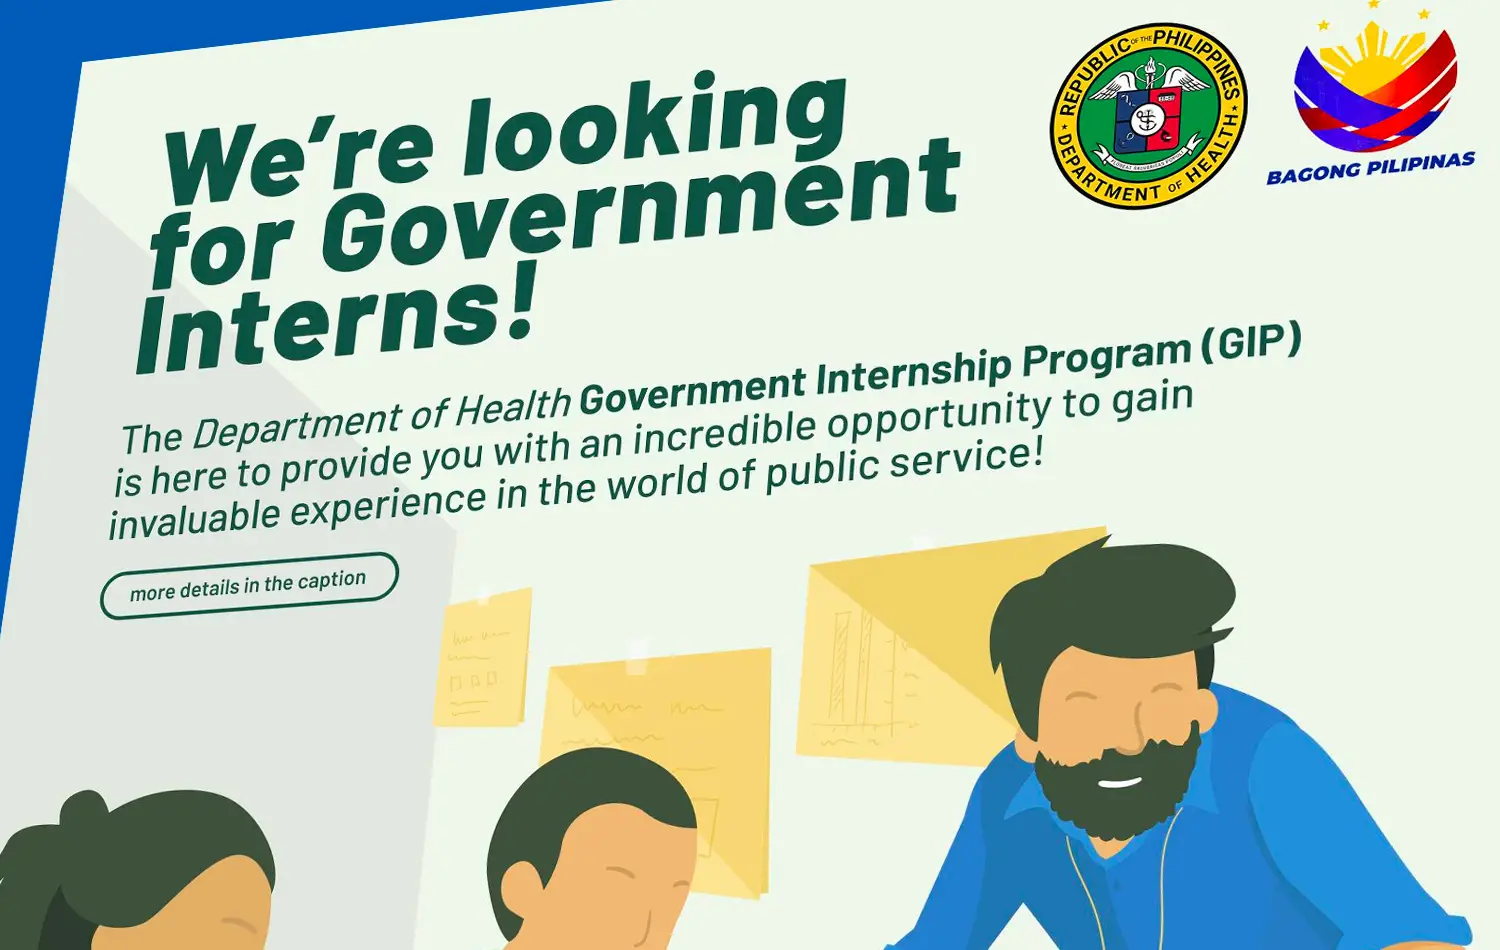 Call For Applicants Department Of Health (DOH) Is Hiring Interns Under